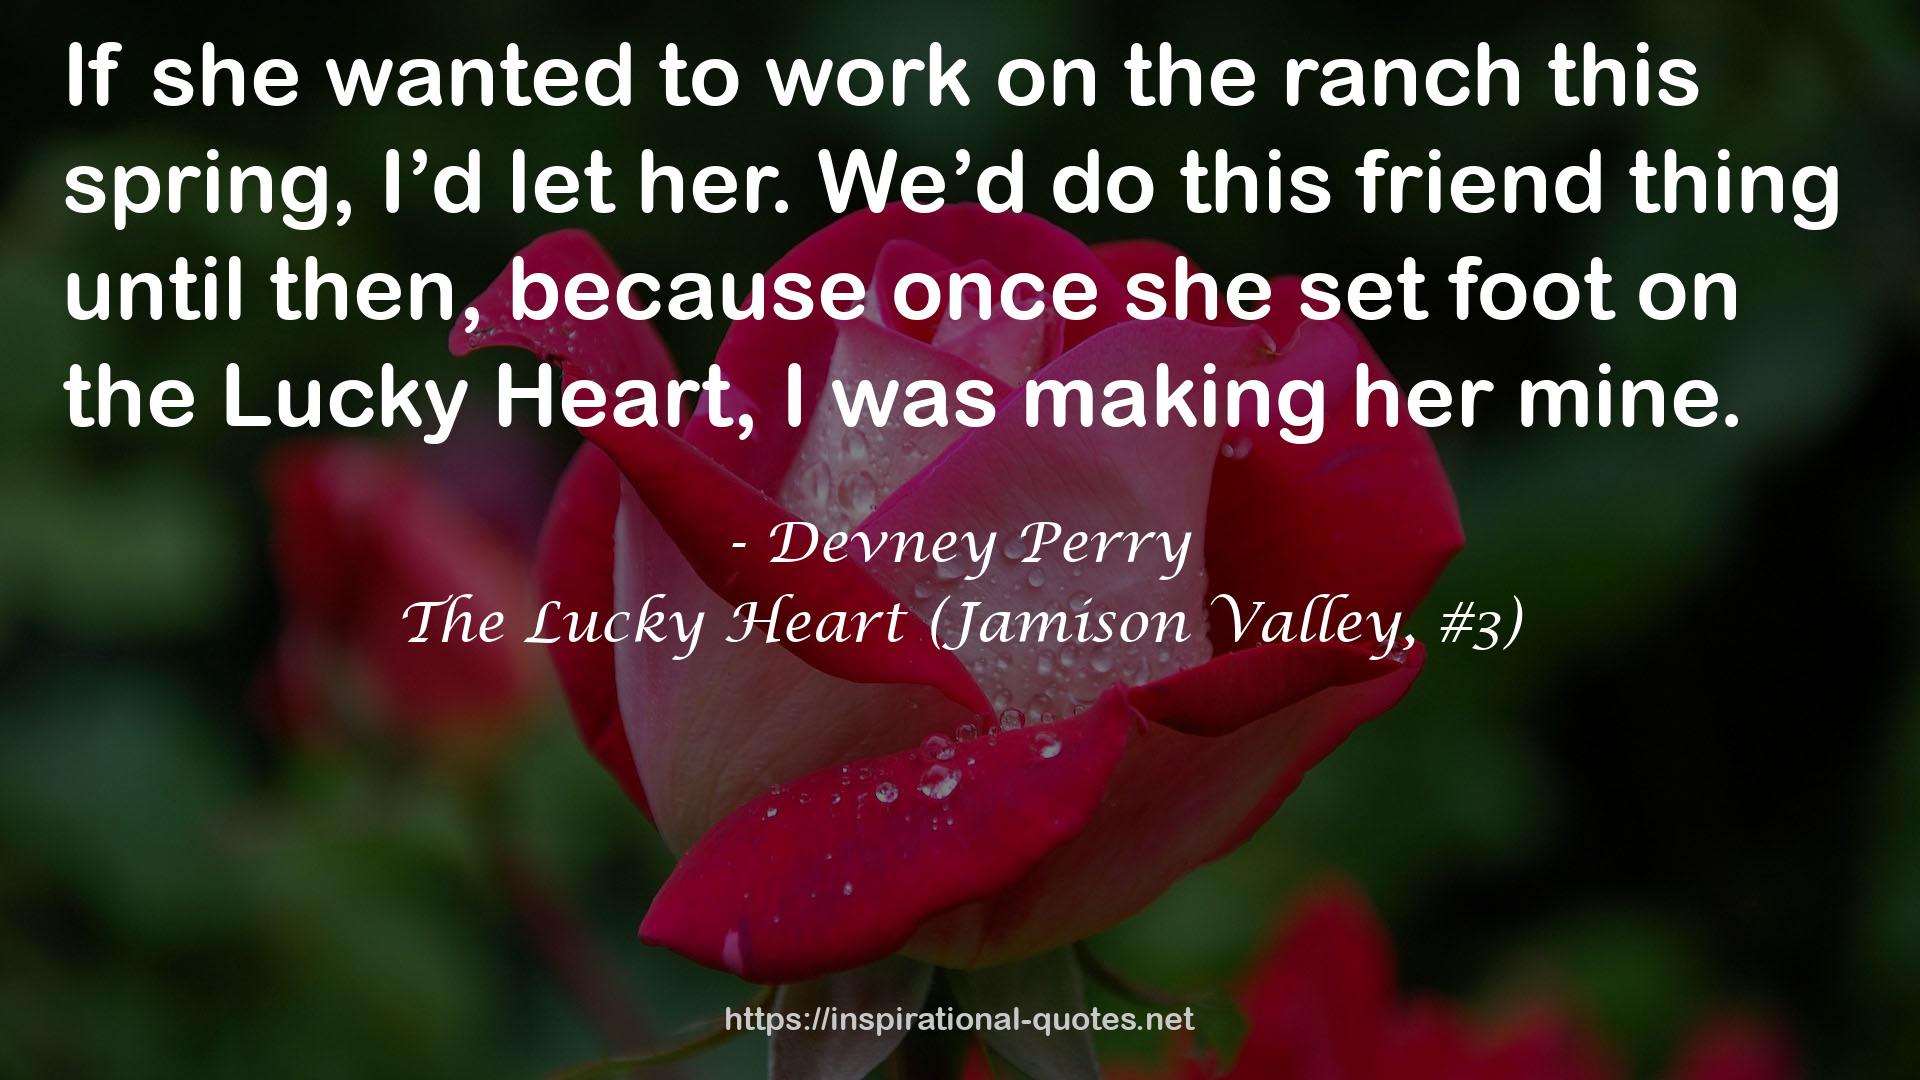 The Lucky Heart (Jamison Valley, #3) QUOTES